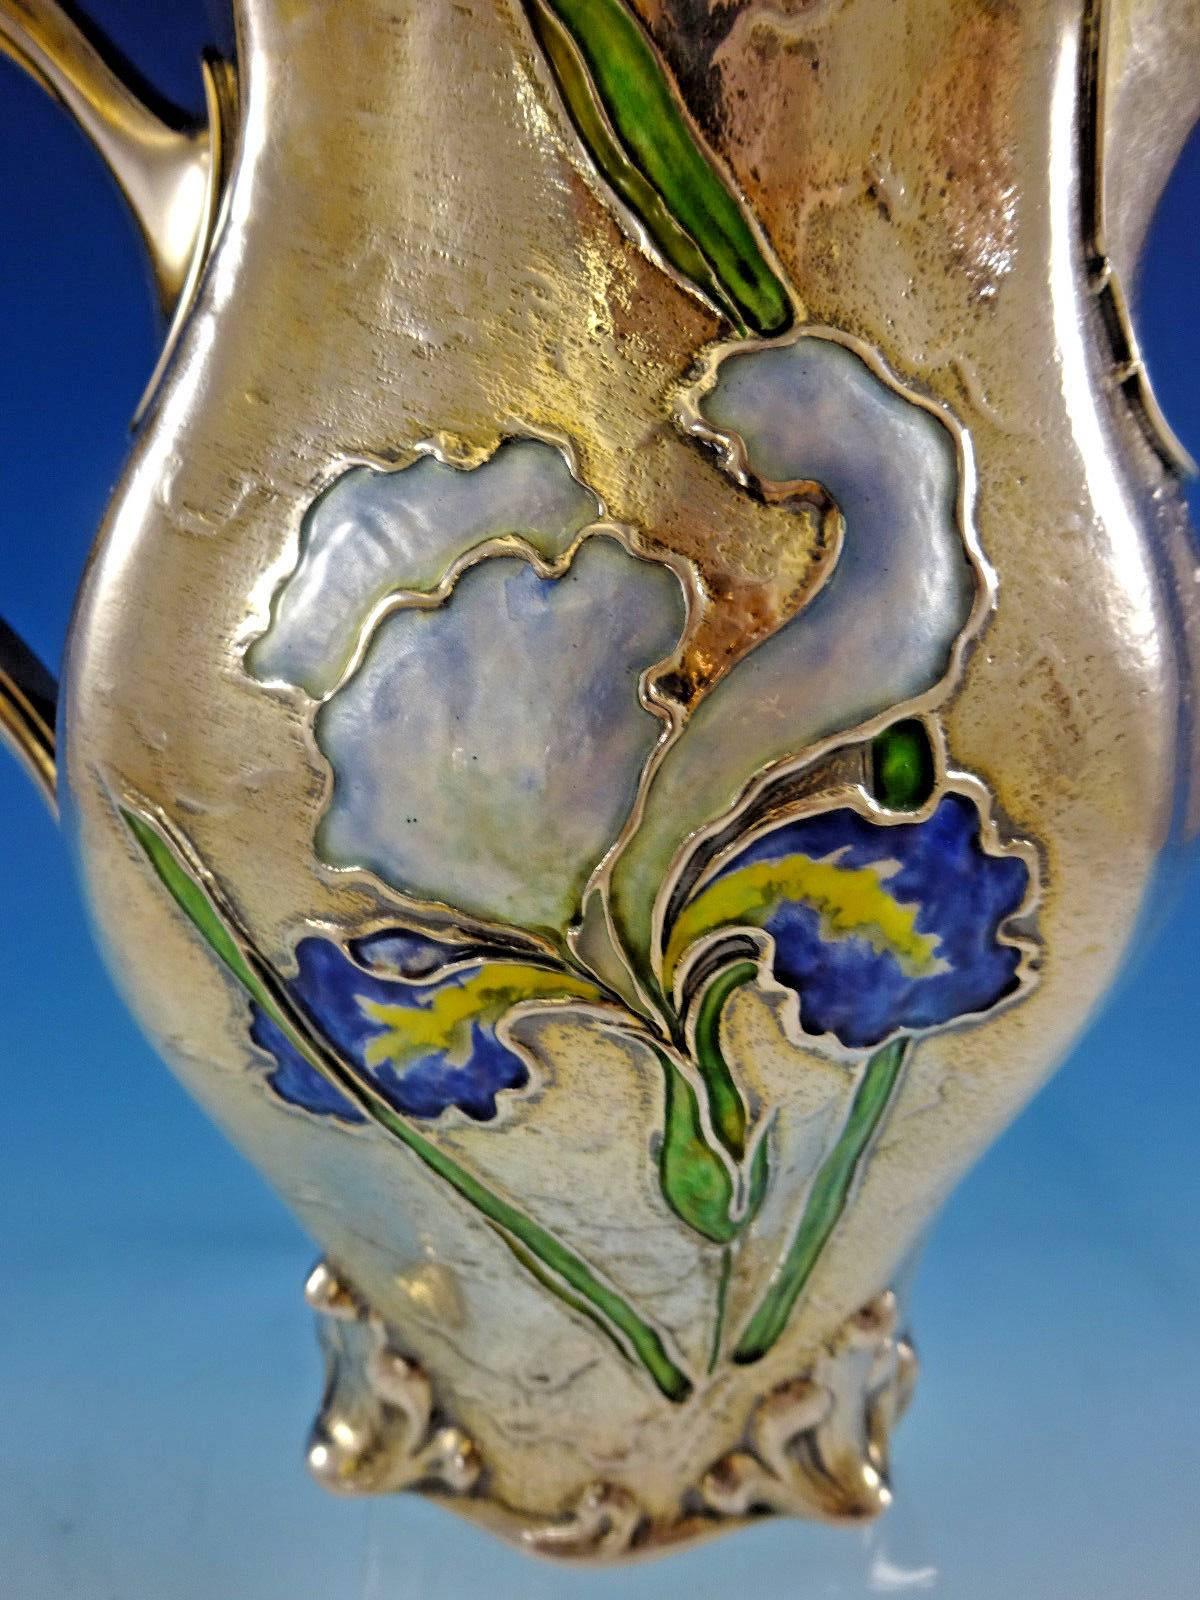 Gorham Enameled Rare Sterling Silver Water Pitcher with Iris, Dated 1897 Antique 2